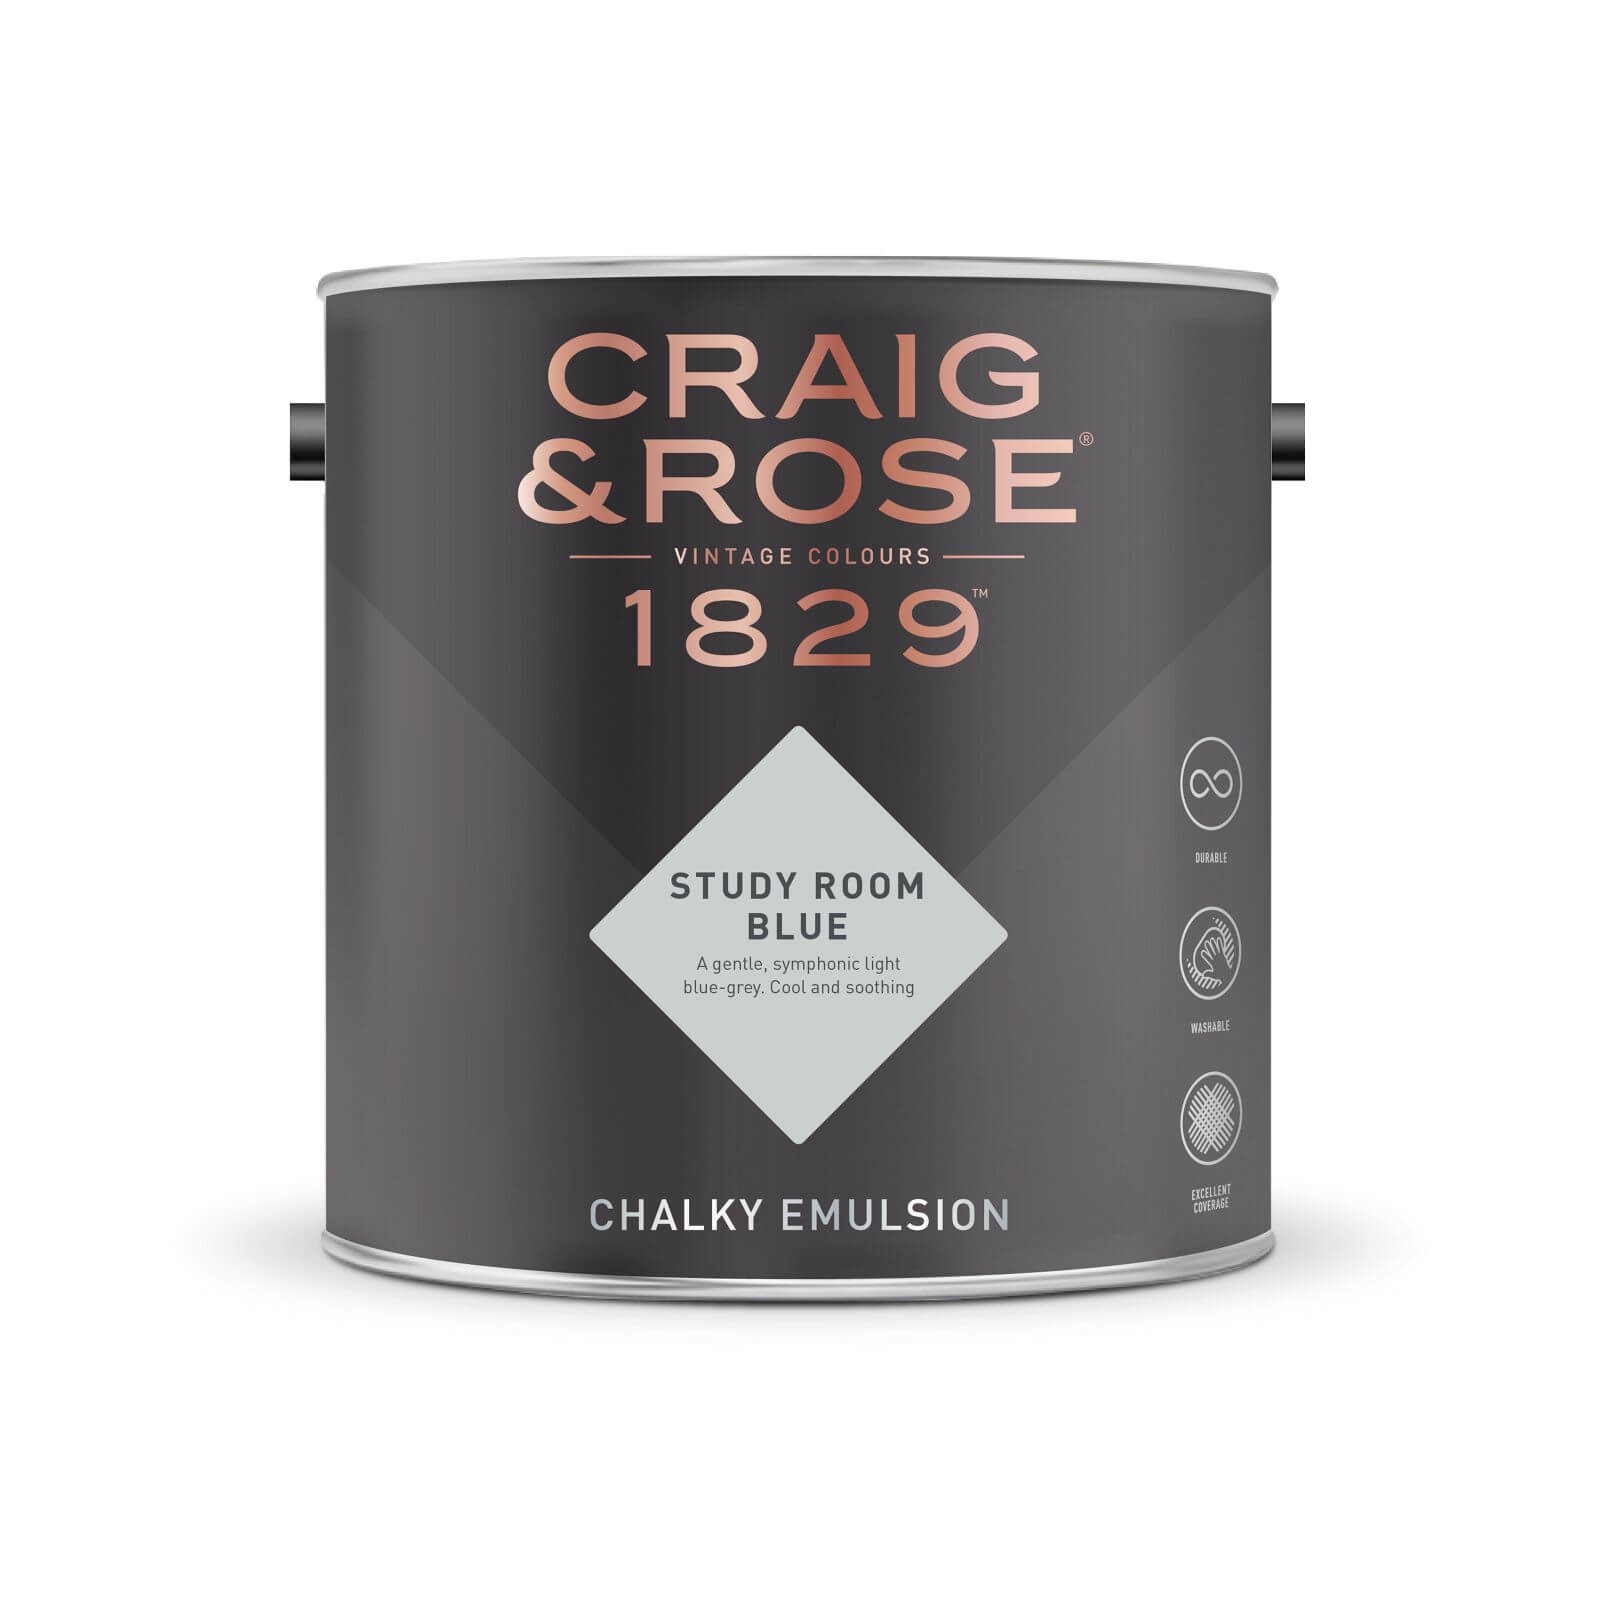 Craig & Rose 1829 Chalky Emulsion Paint Study Room Blue - Tester 50ml